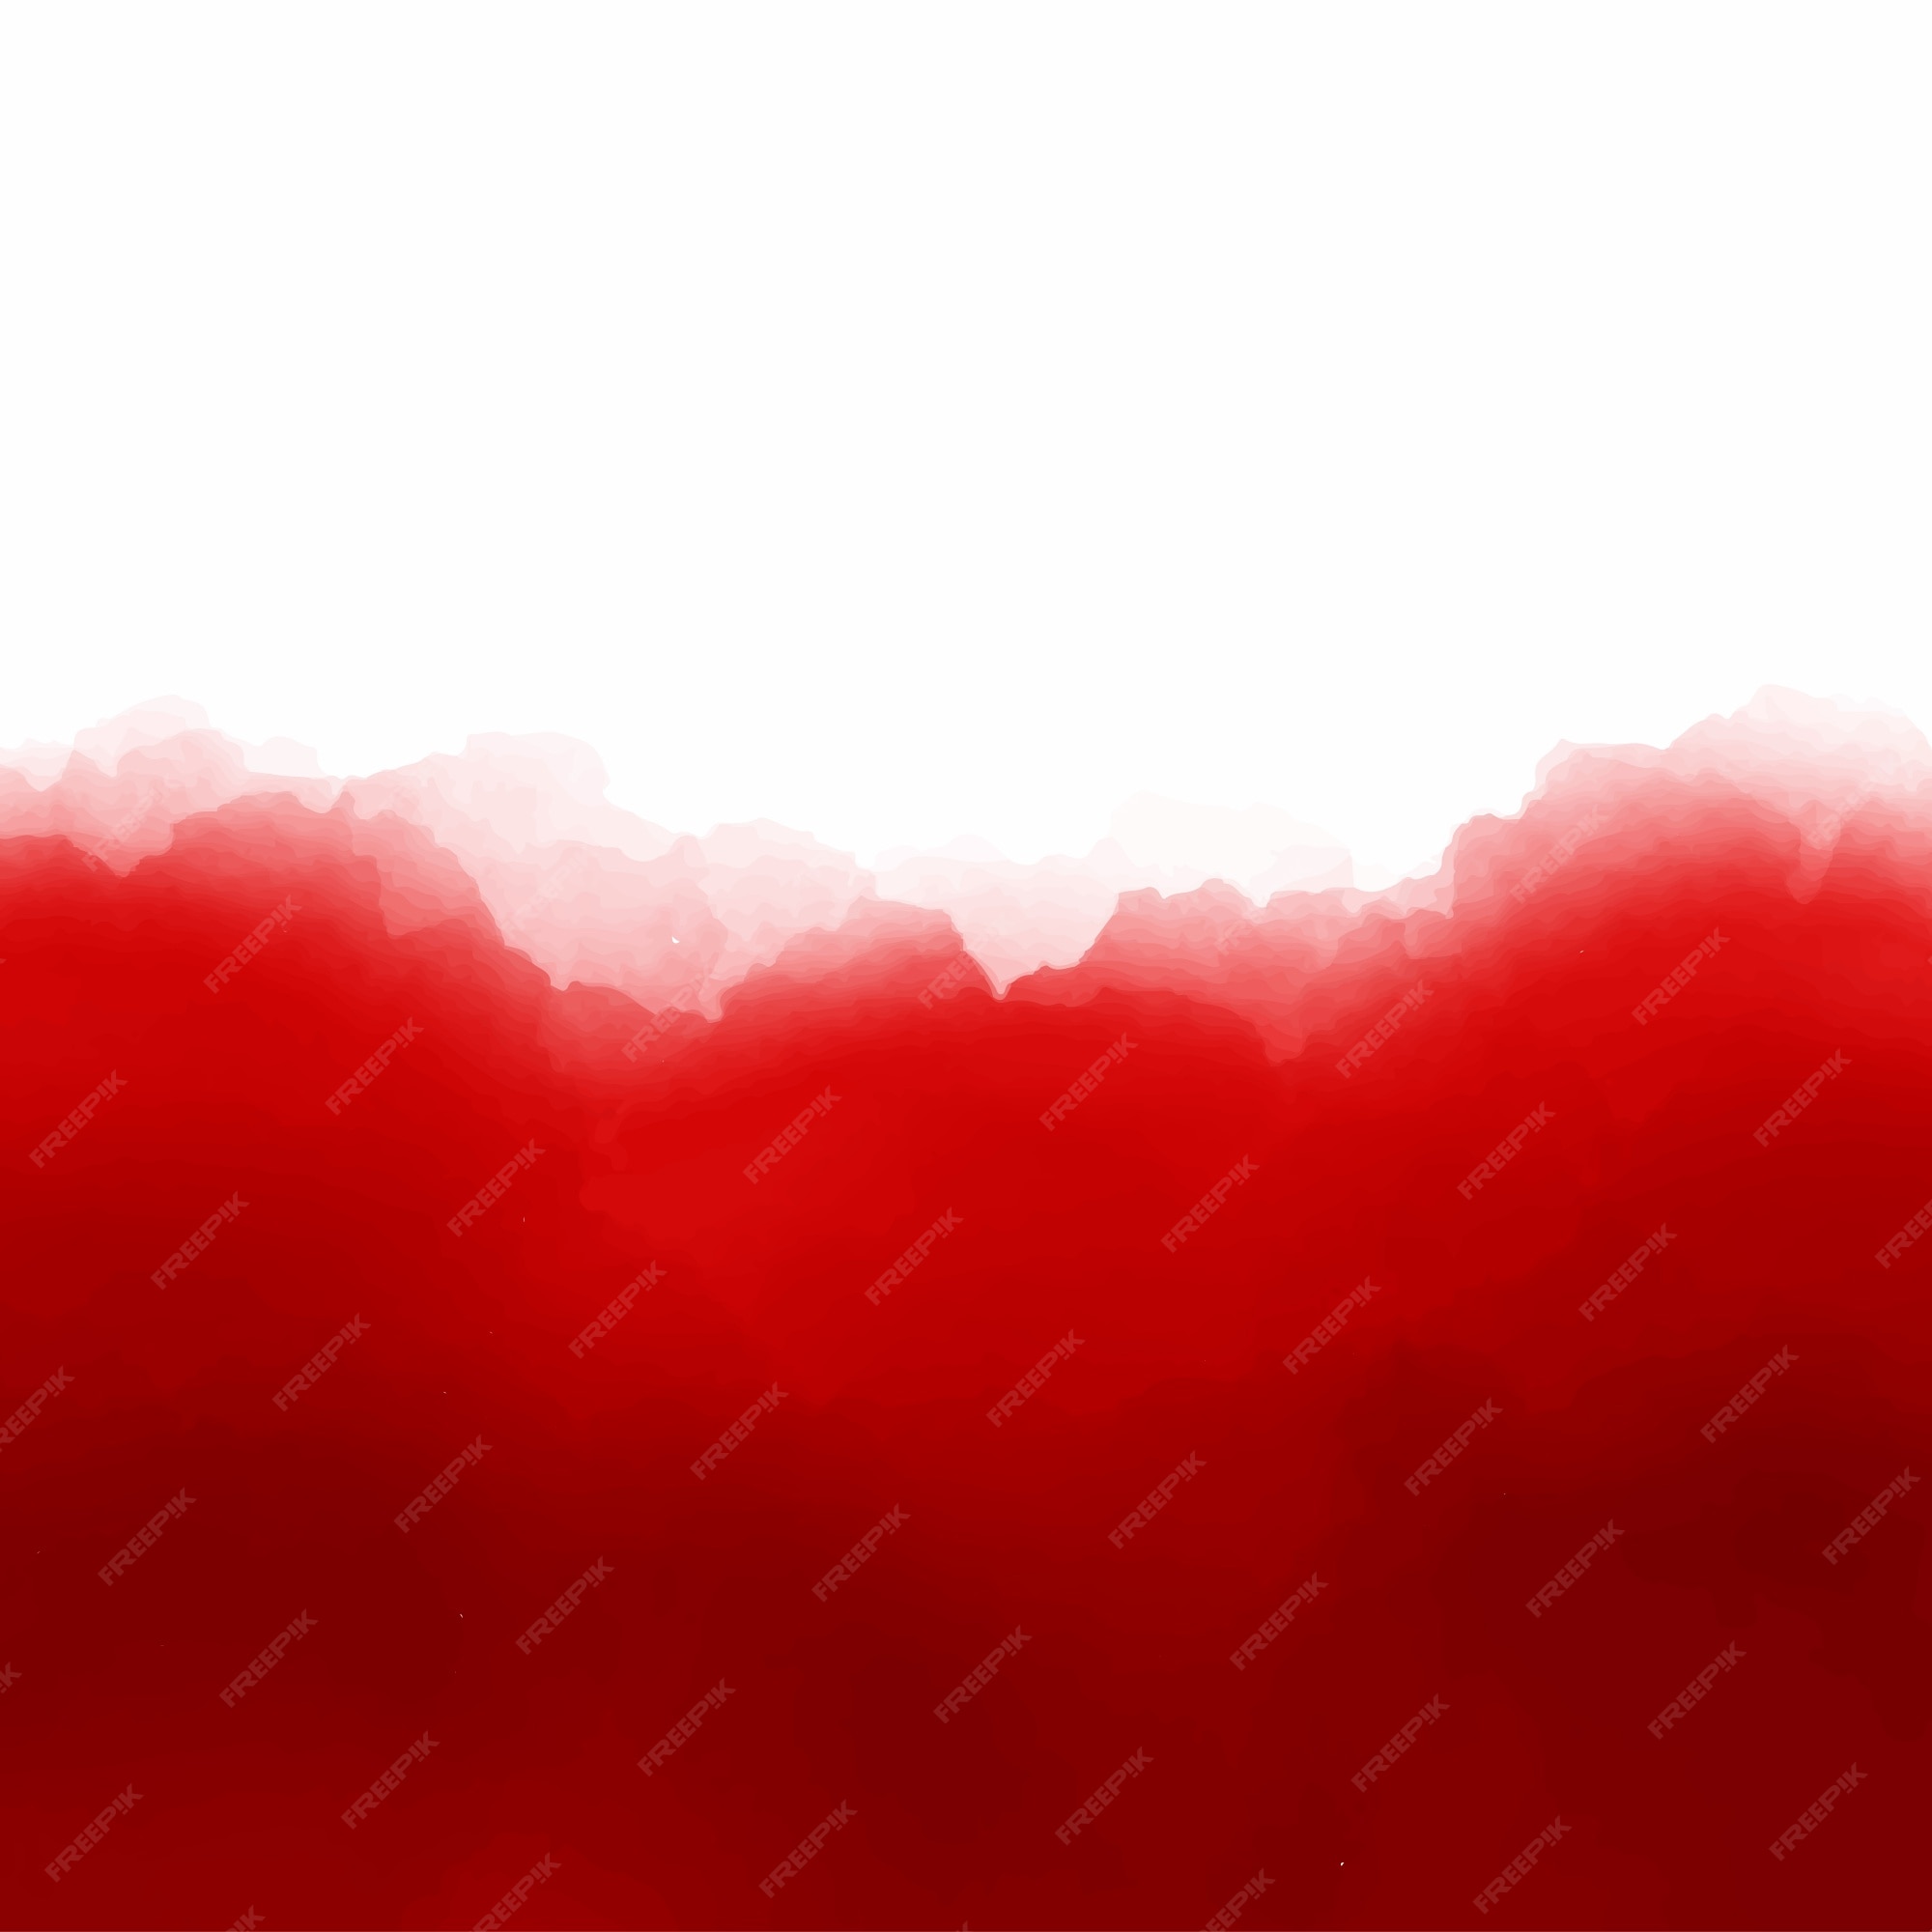 Red Watercolor Images - Free Download on Freepik